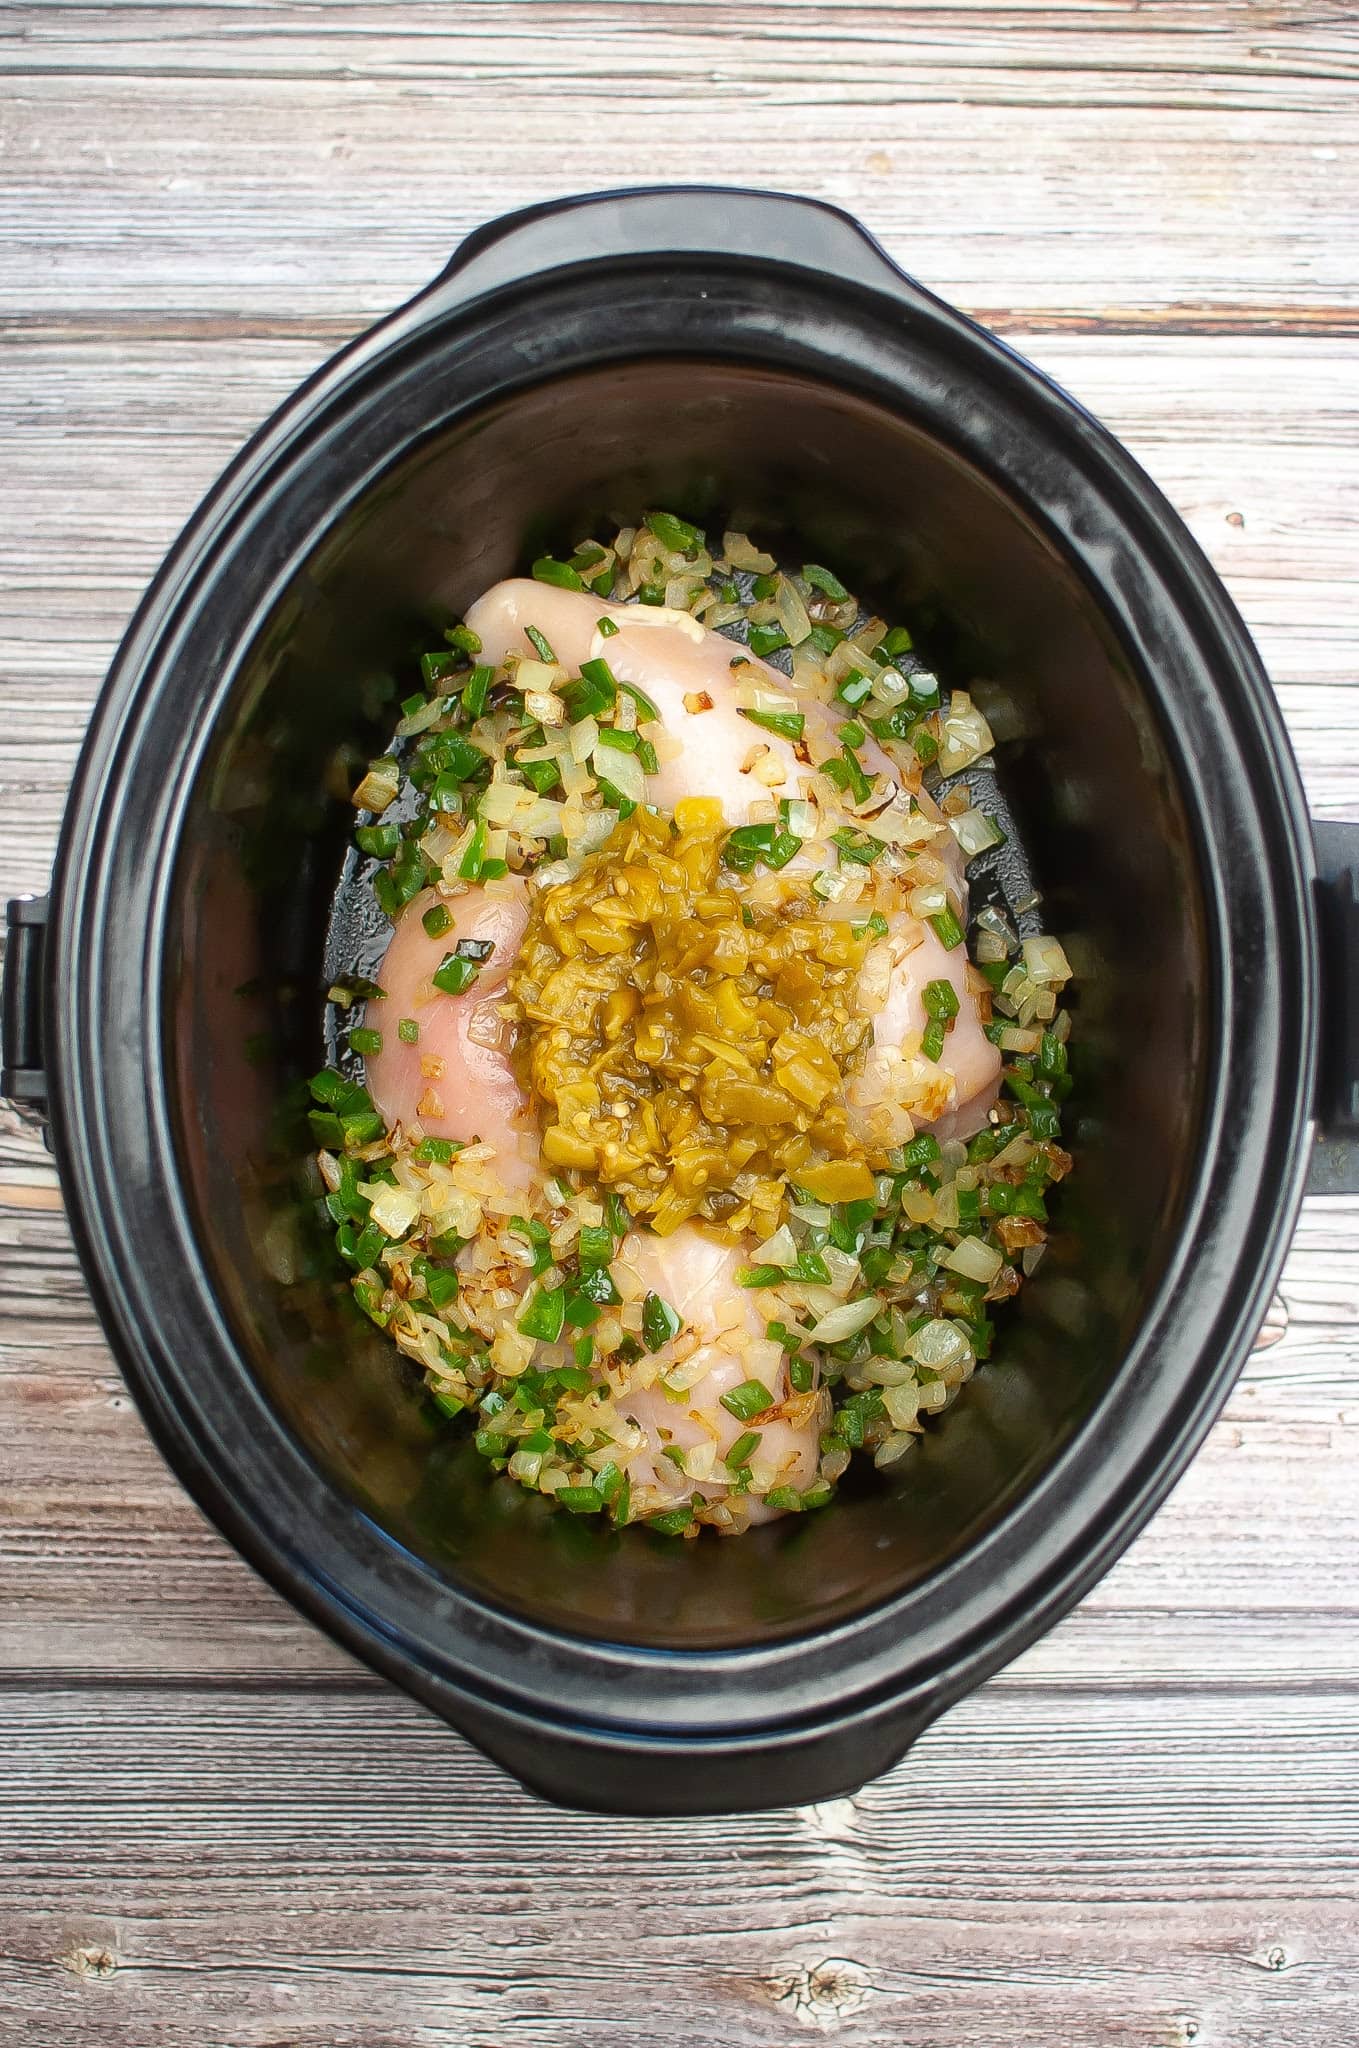 A crock pot filled with chicken and herbs to make white chicken chili.